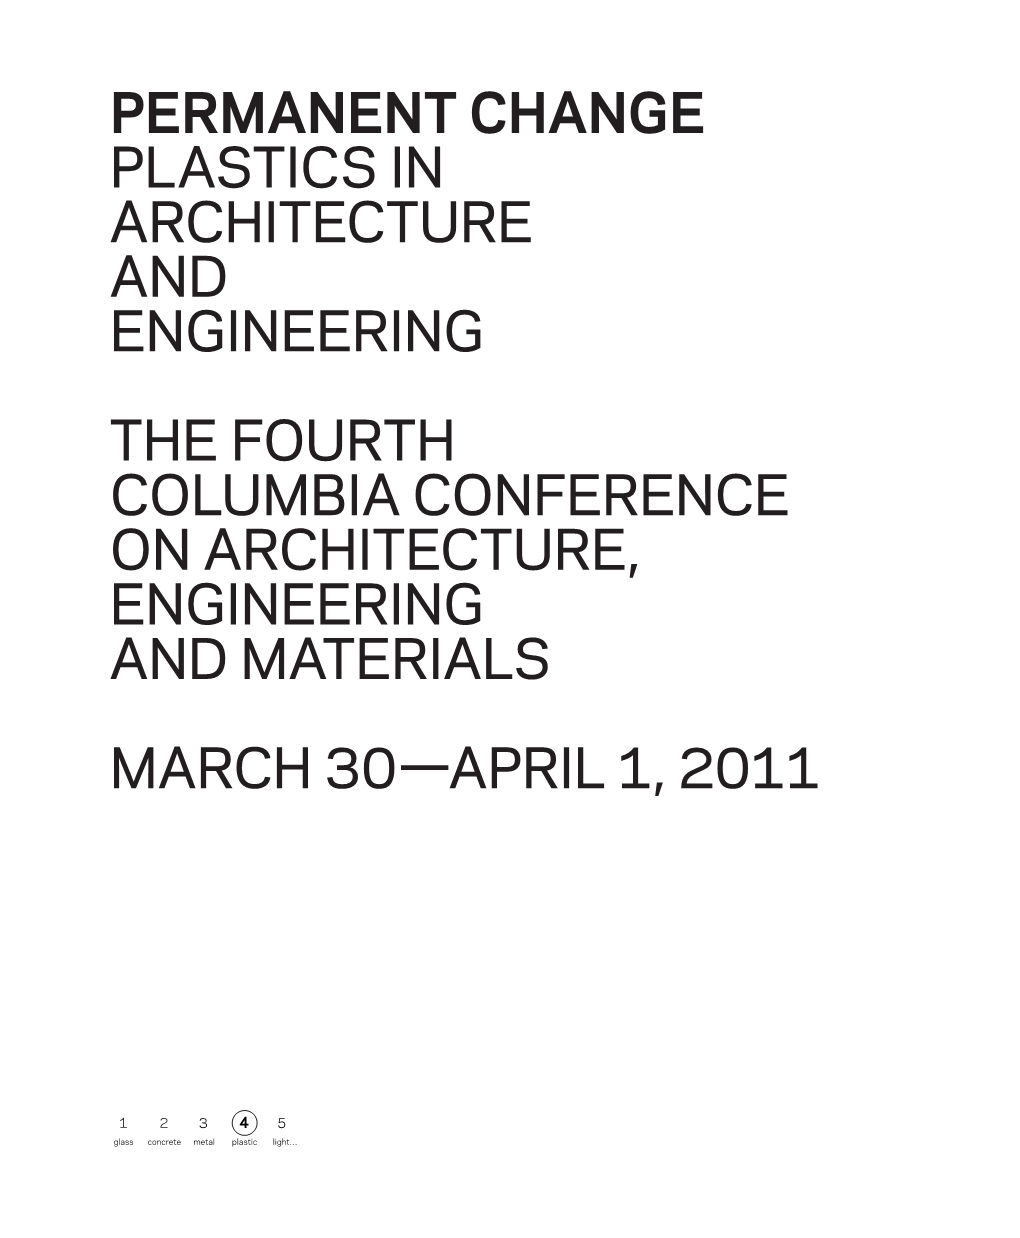 Permanent Change Plastics in Architecture and Engineering